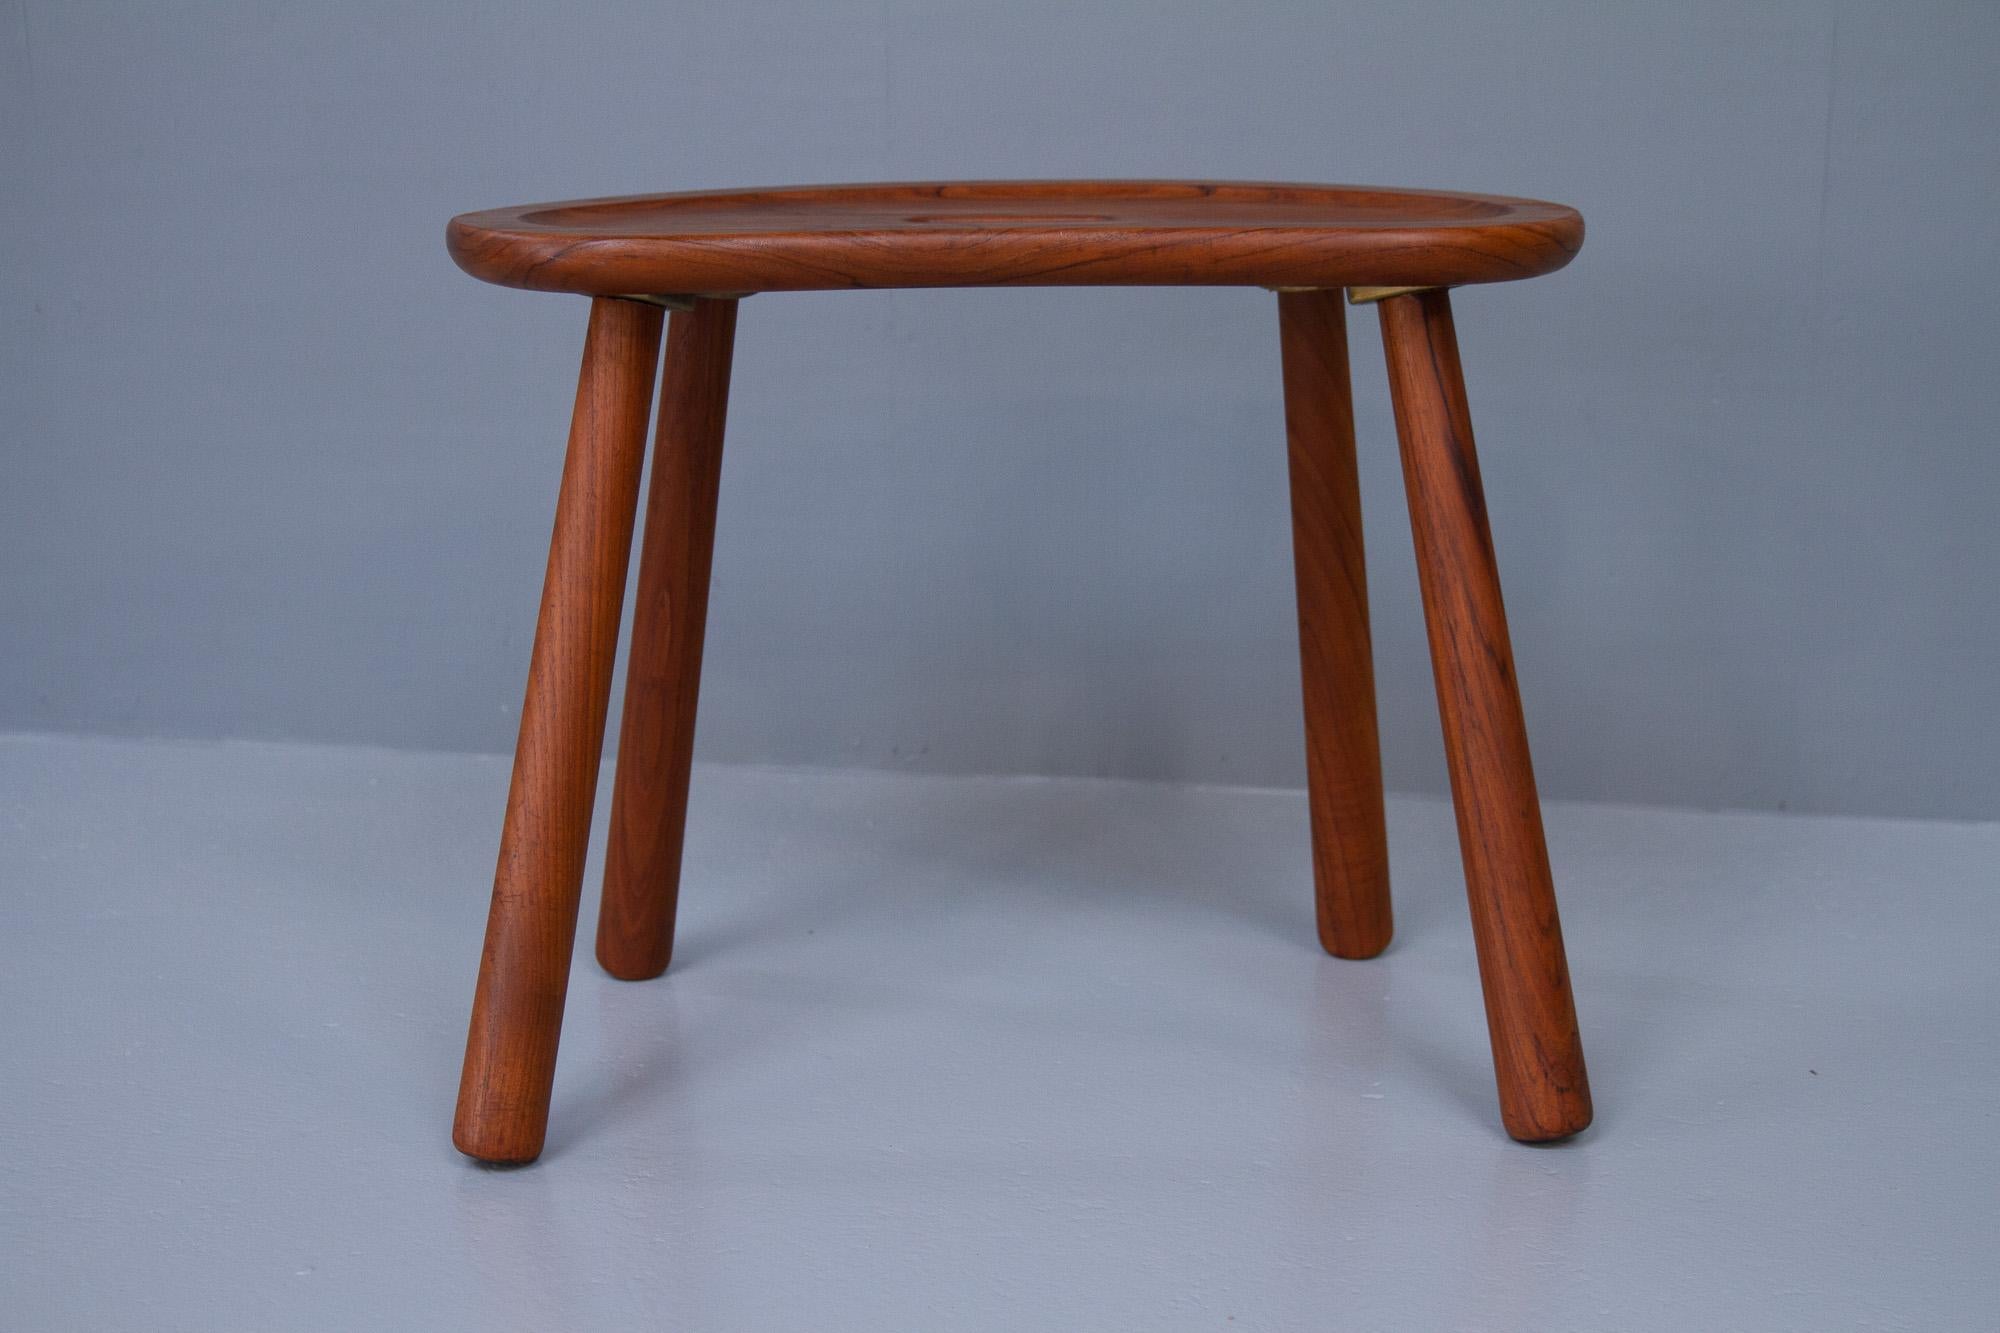 Danish Modern teak stool by ESA, 1950s.
Organically shaped Danish stool in solid teak. Beautifully sculpted seat. Four round legs with club shaped profile (like the Clam Chair), mounted with brass brackets. 
Very beautiful and simple yet